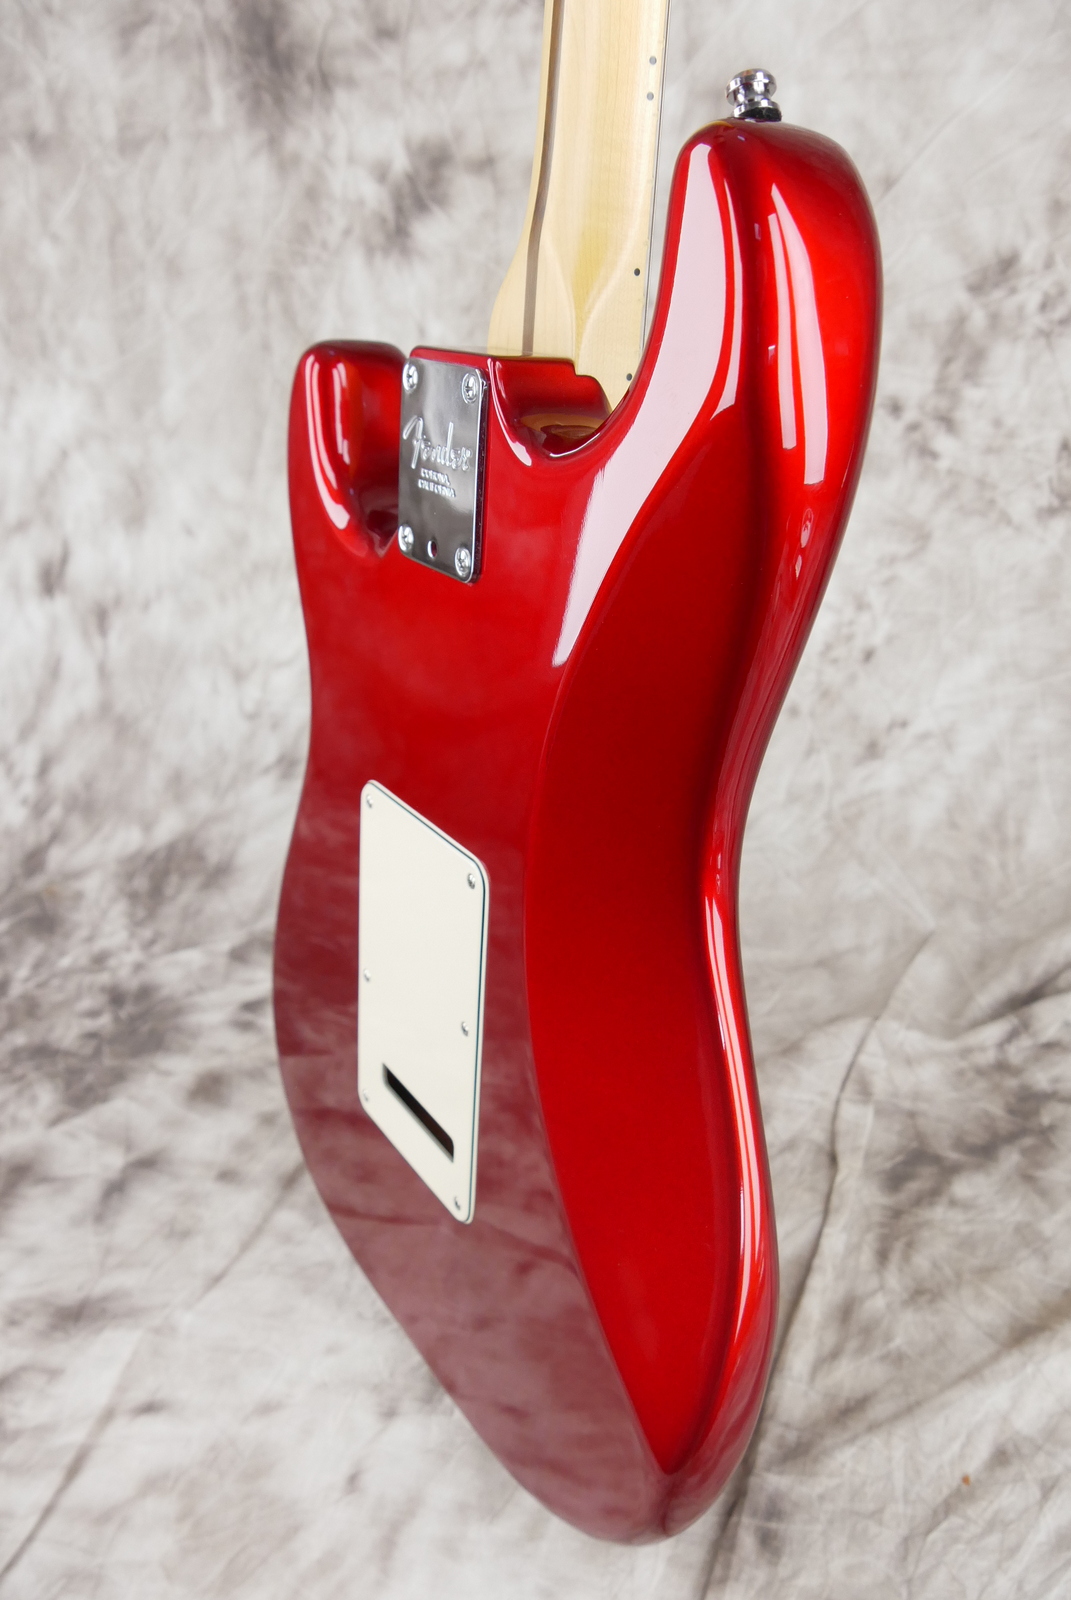 Fender_Stratocaster_USA_built_from_parts_candy_apple_red_2015-008.JPG